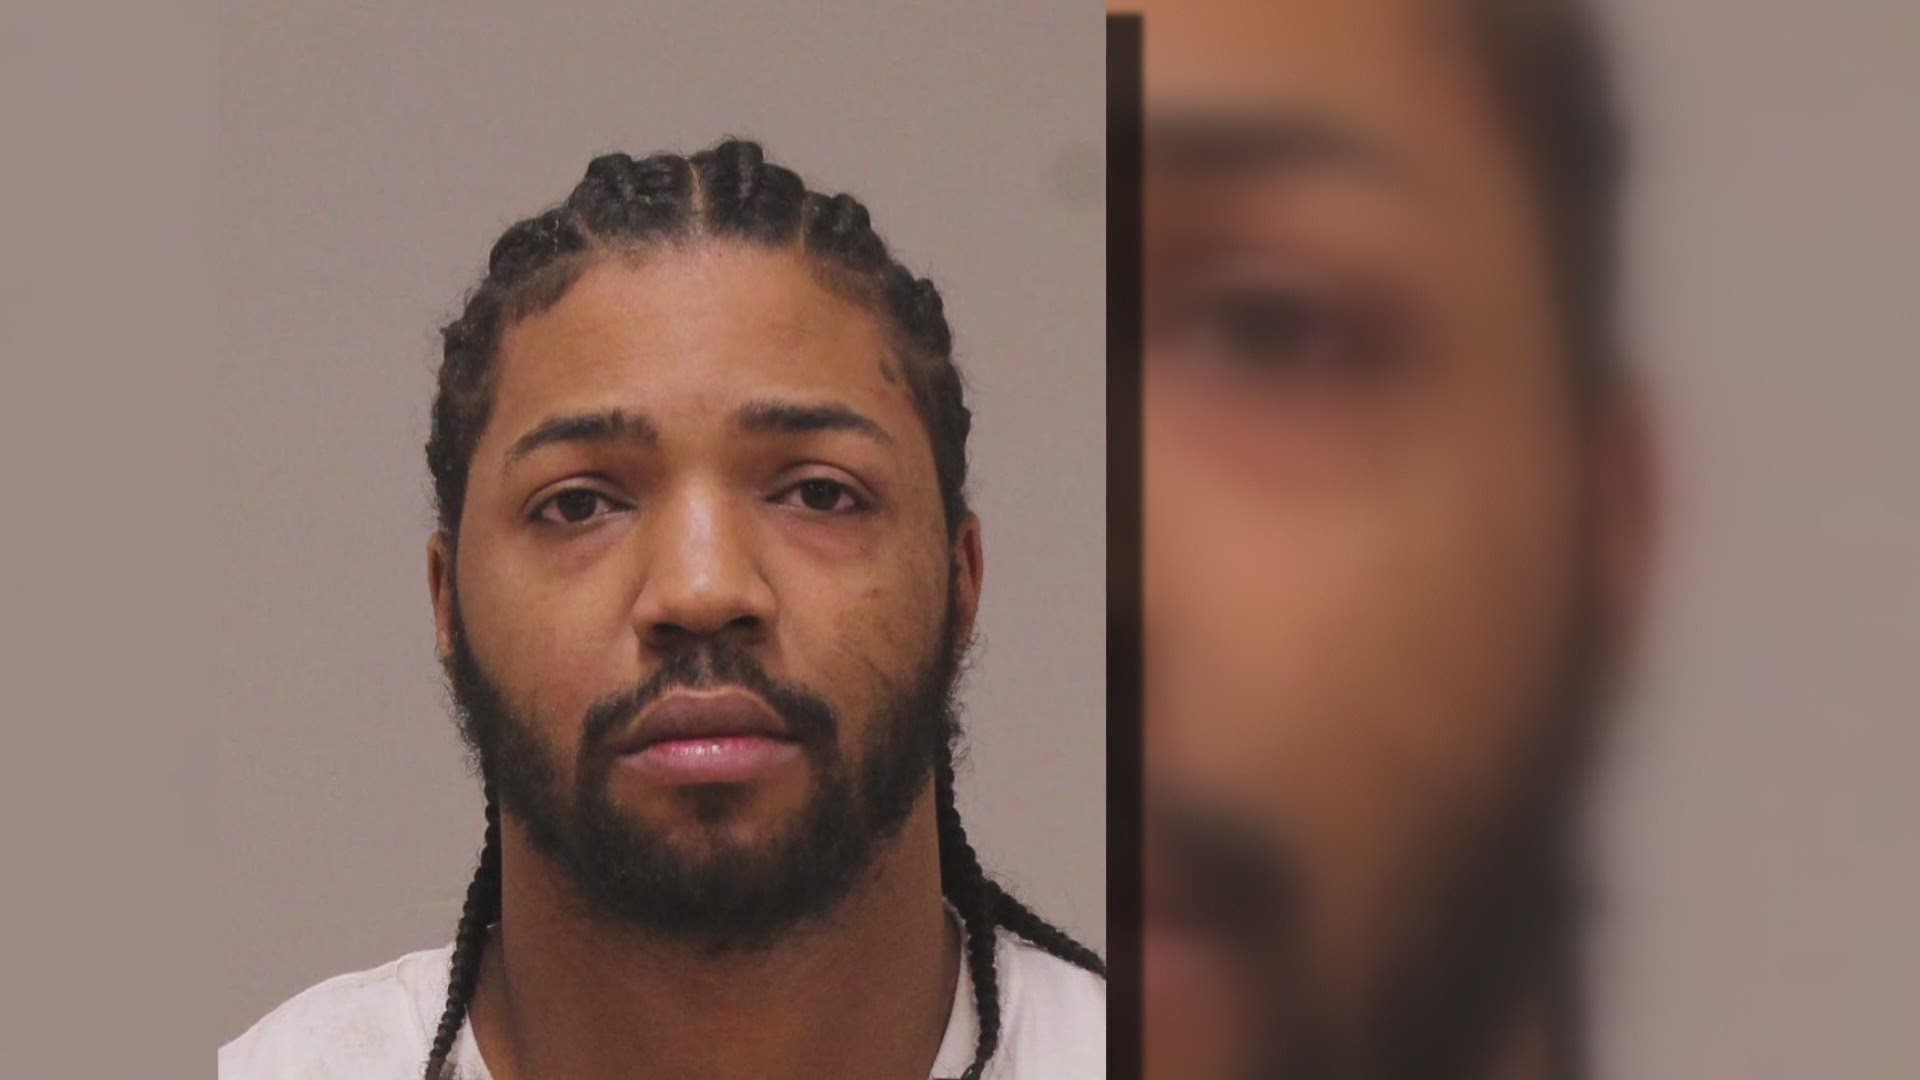 A judge sentenced Martae Manning to jail and probation for providing a mix of heroin and fentanyl that killed a woman in Plainfield Township in 2019.